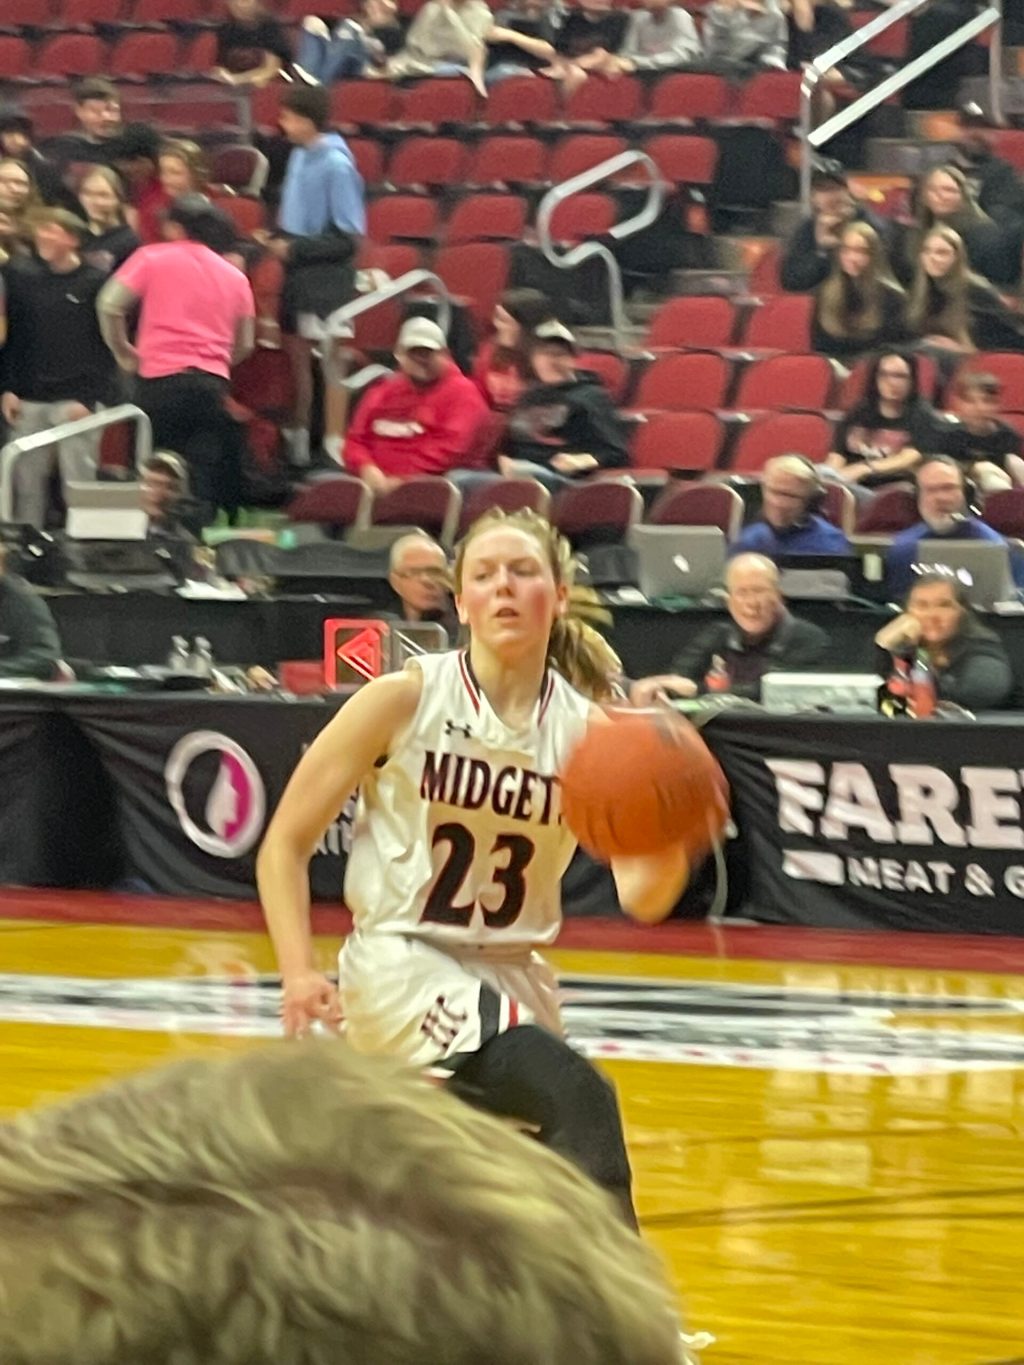 3A Standouts on Day One of the State Tournament